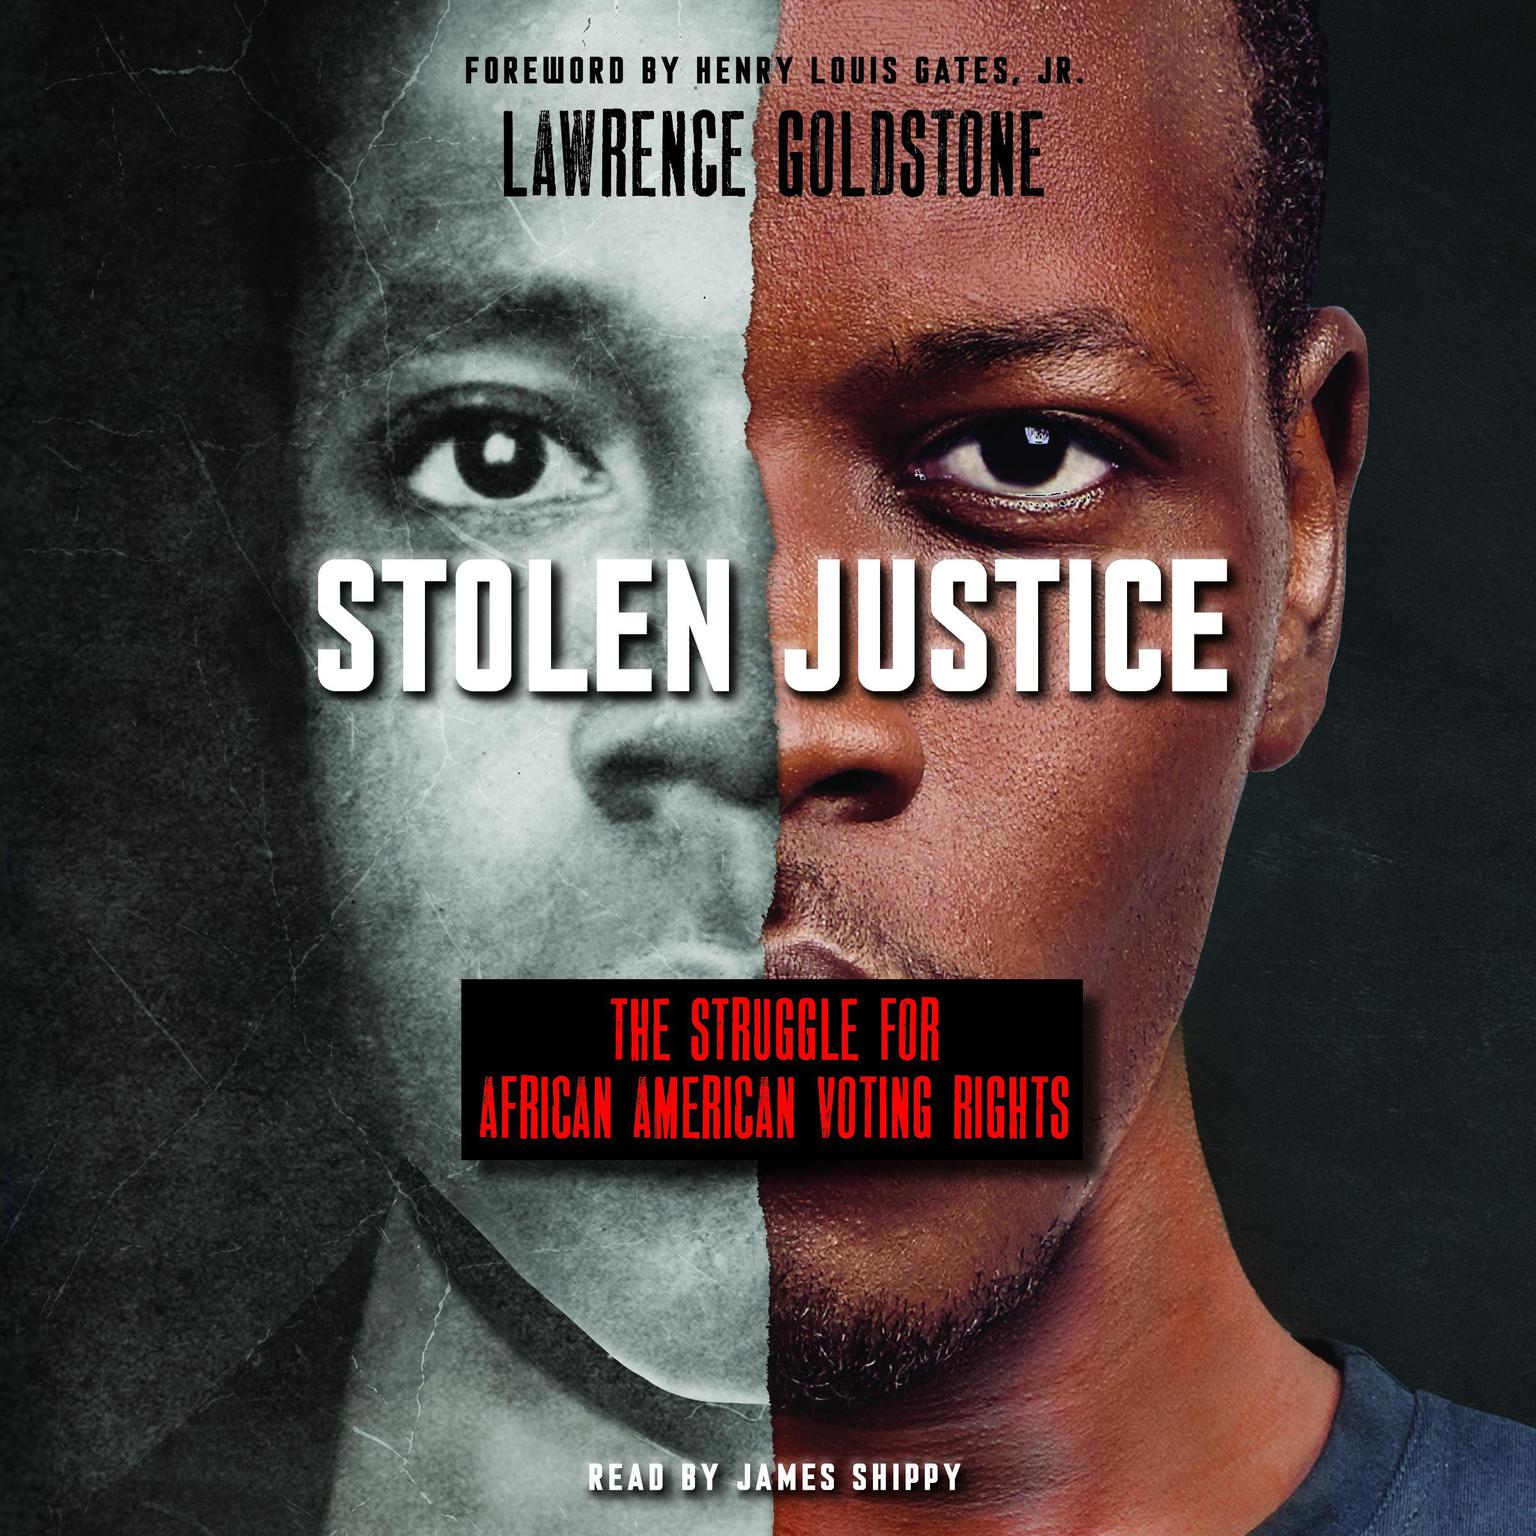 Stolen Justice: The Struggle for African American Voting Rights (Scholastic Focus): The Struggle for African American Voting Rights Audiobook, by Lawrence Goldstone